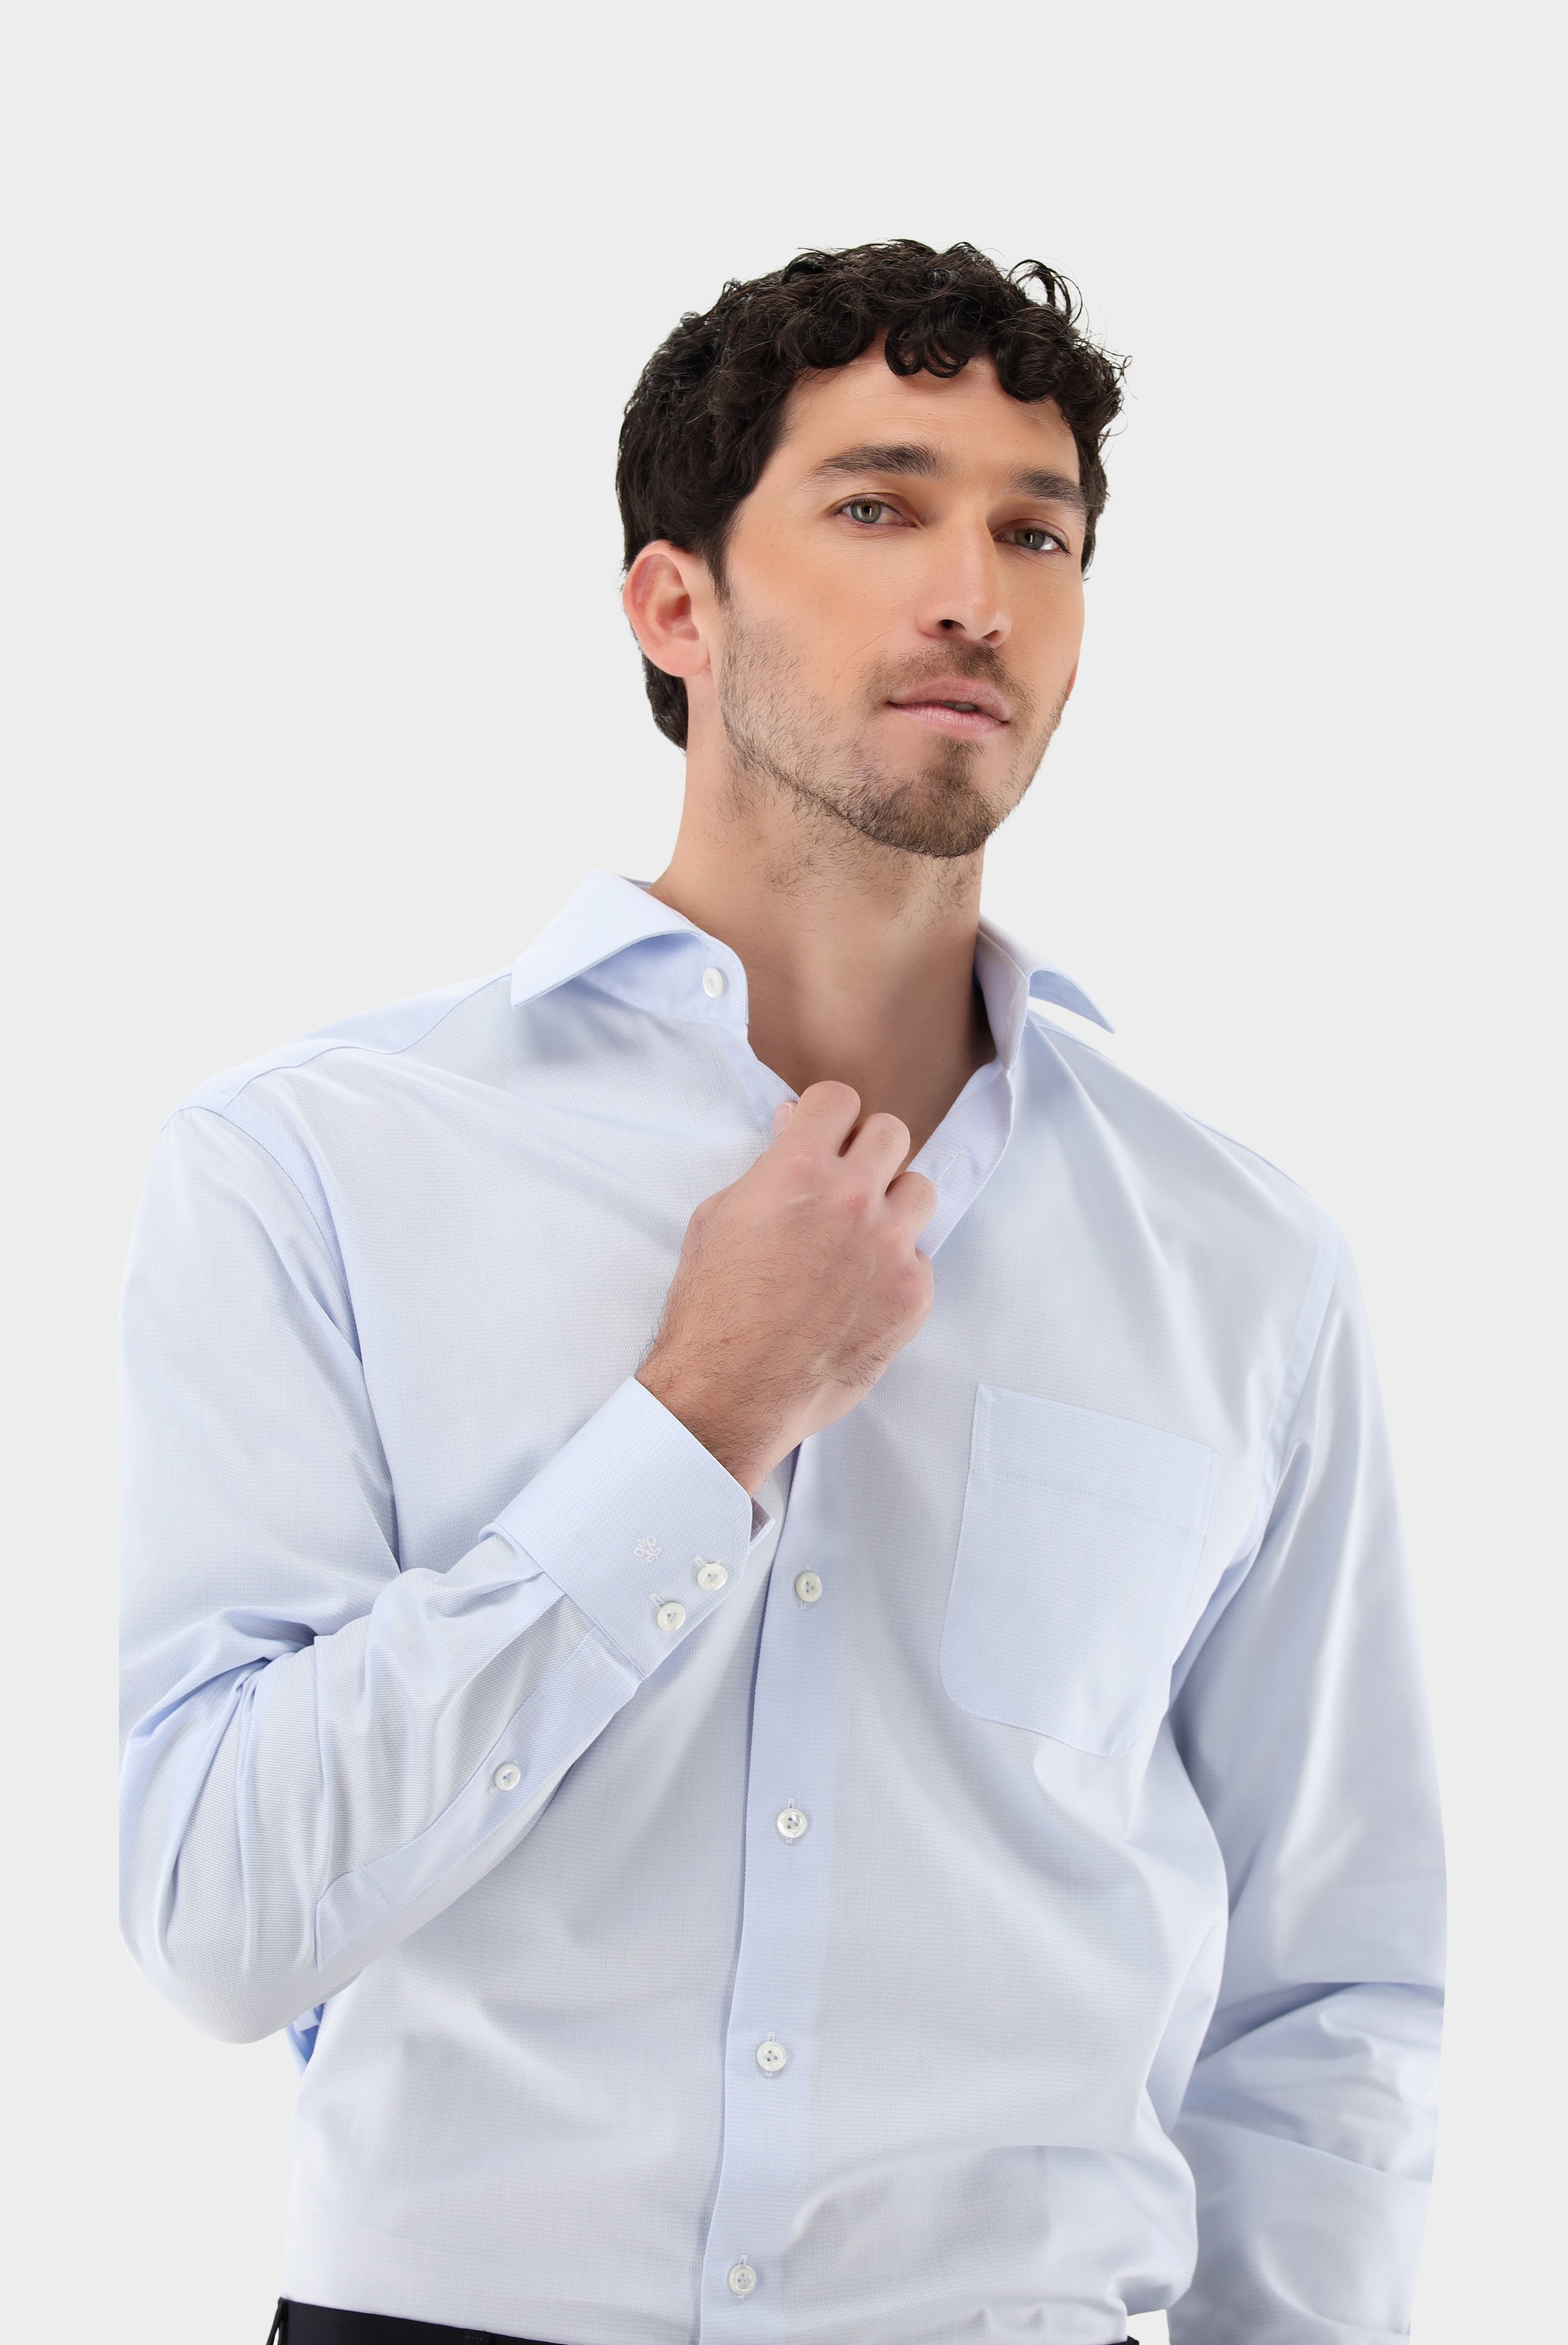 Easy Iron Shirts+Wrinkle Free Twill Shirt with Texture Comfort Fit+20.2021.BQ.150301.720.39